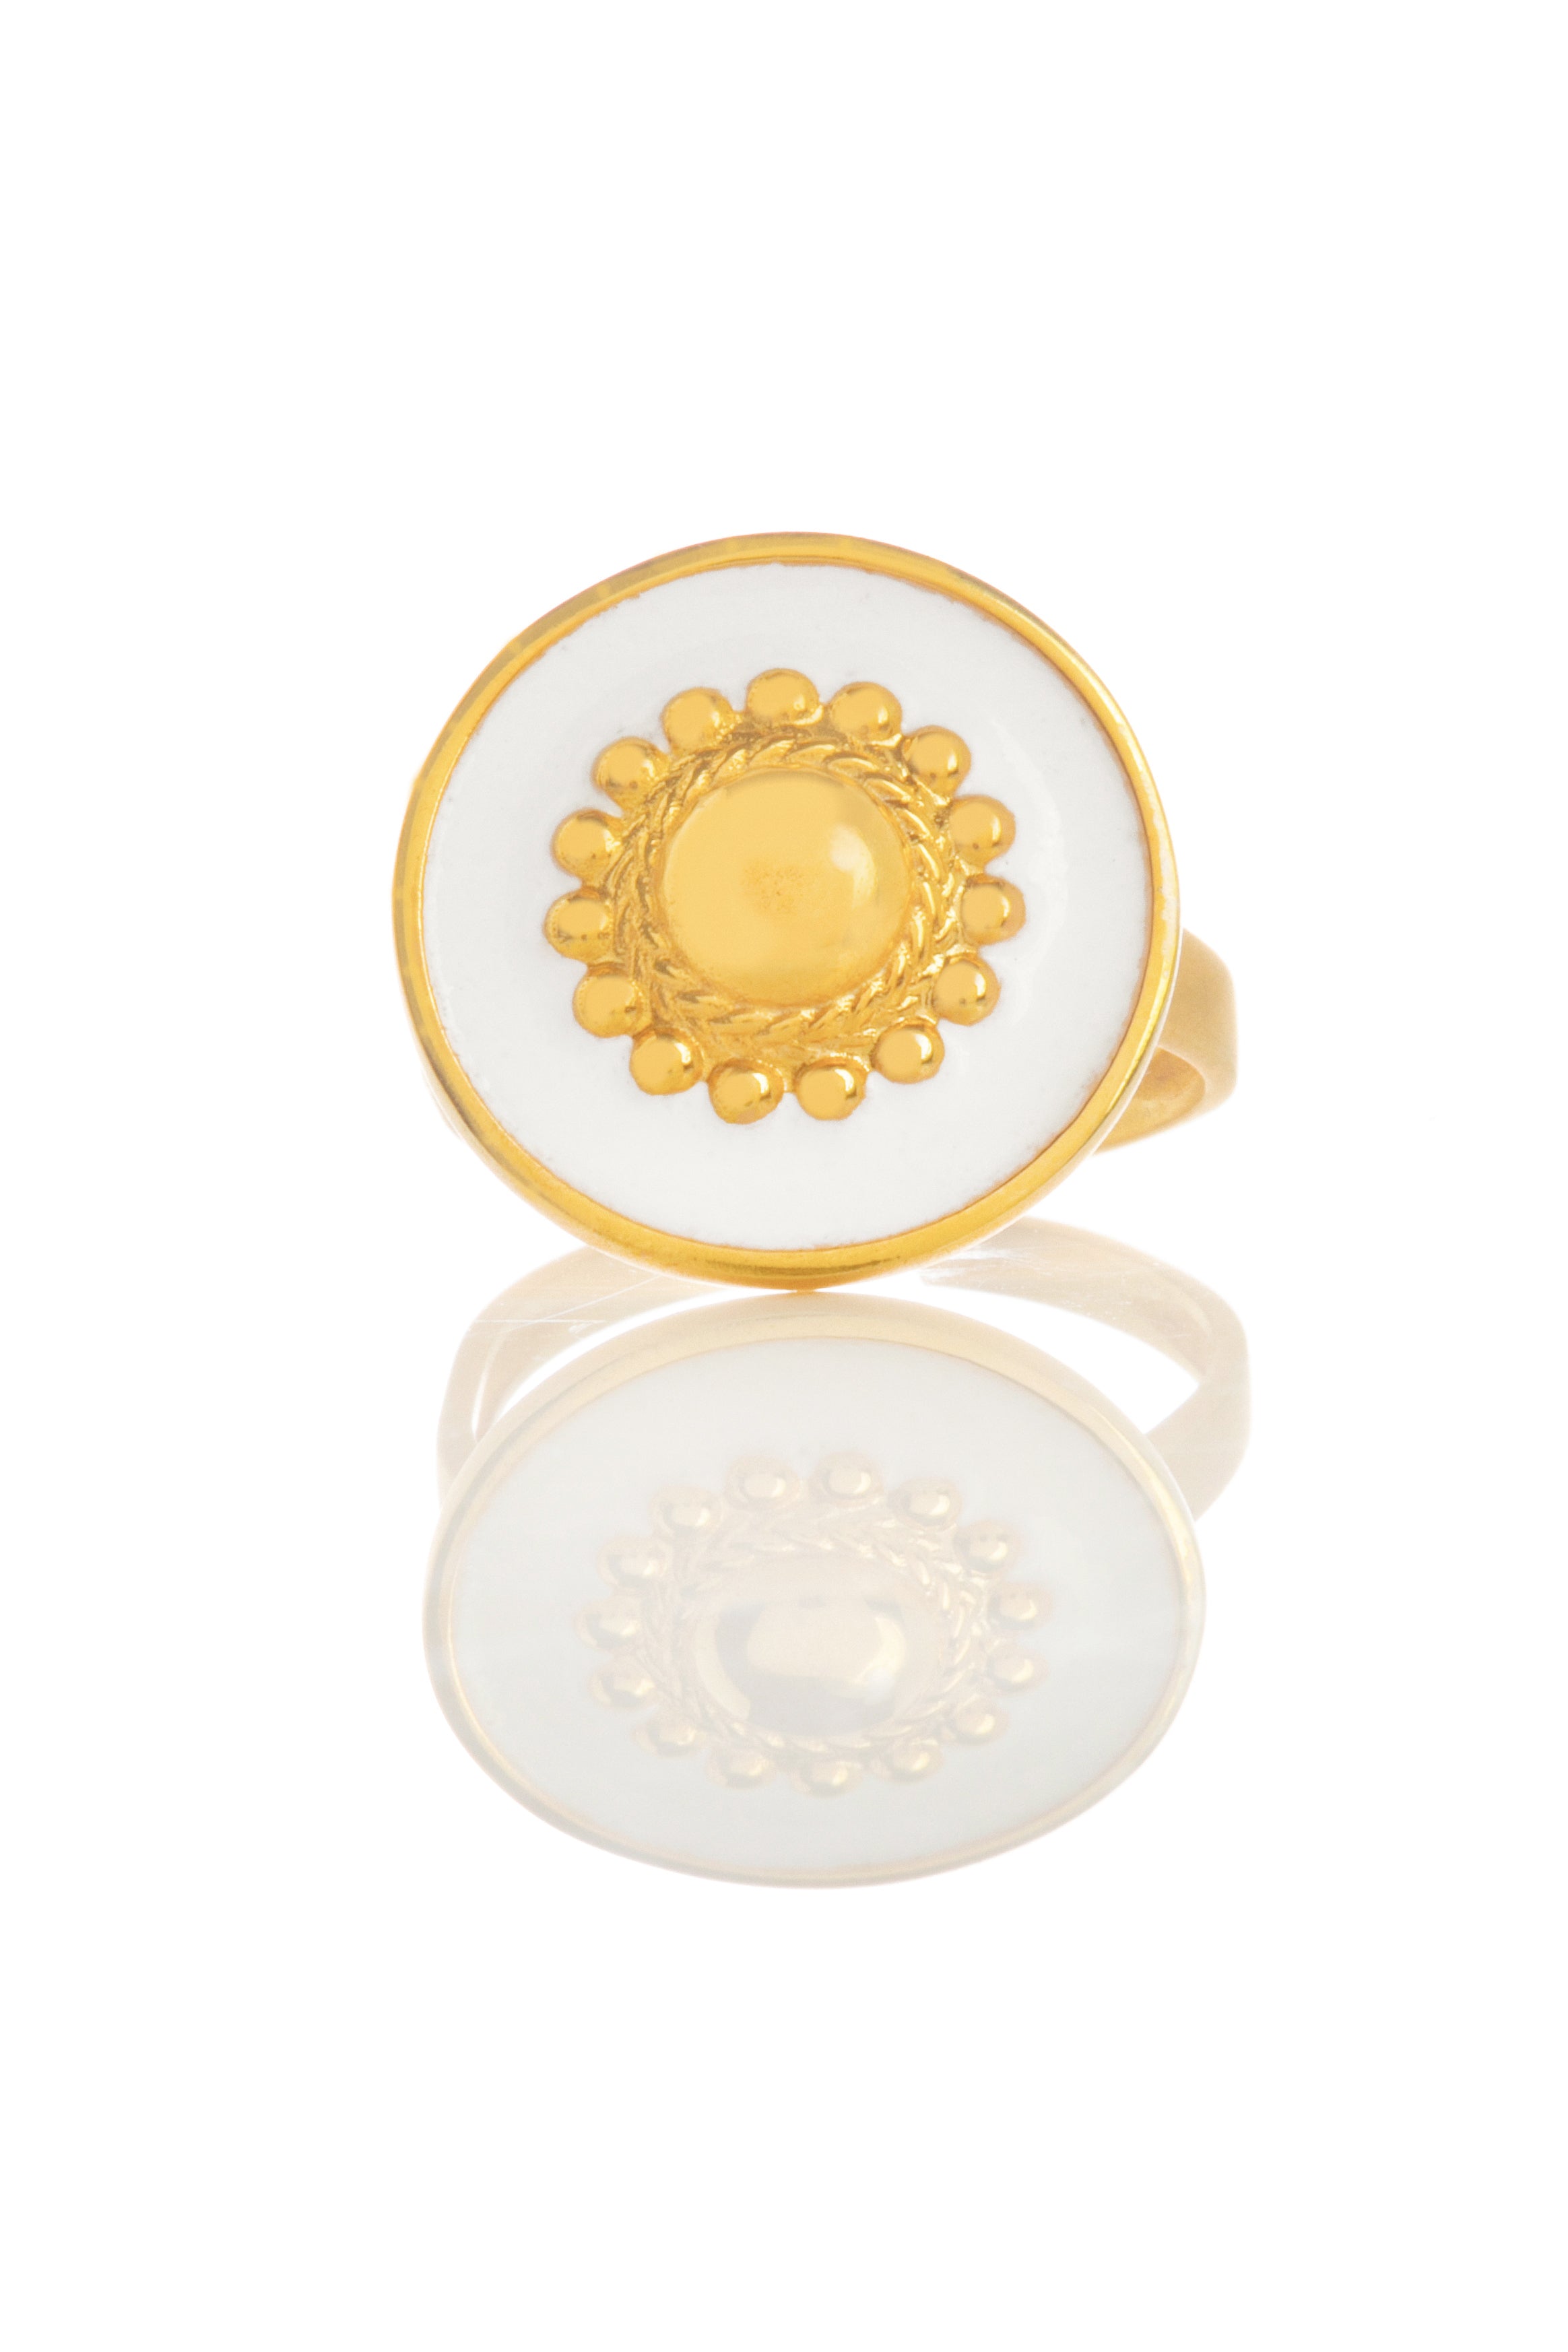 Thaleia ring, silver 925° gold plated 22k by Pearl Martini